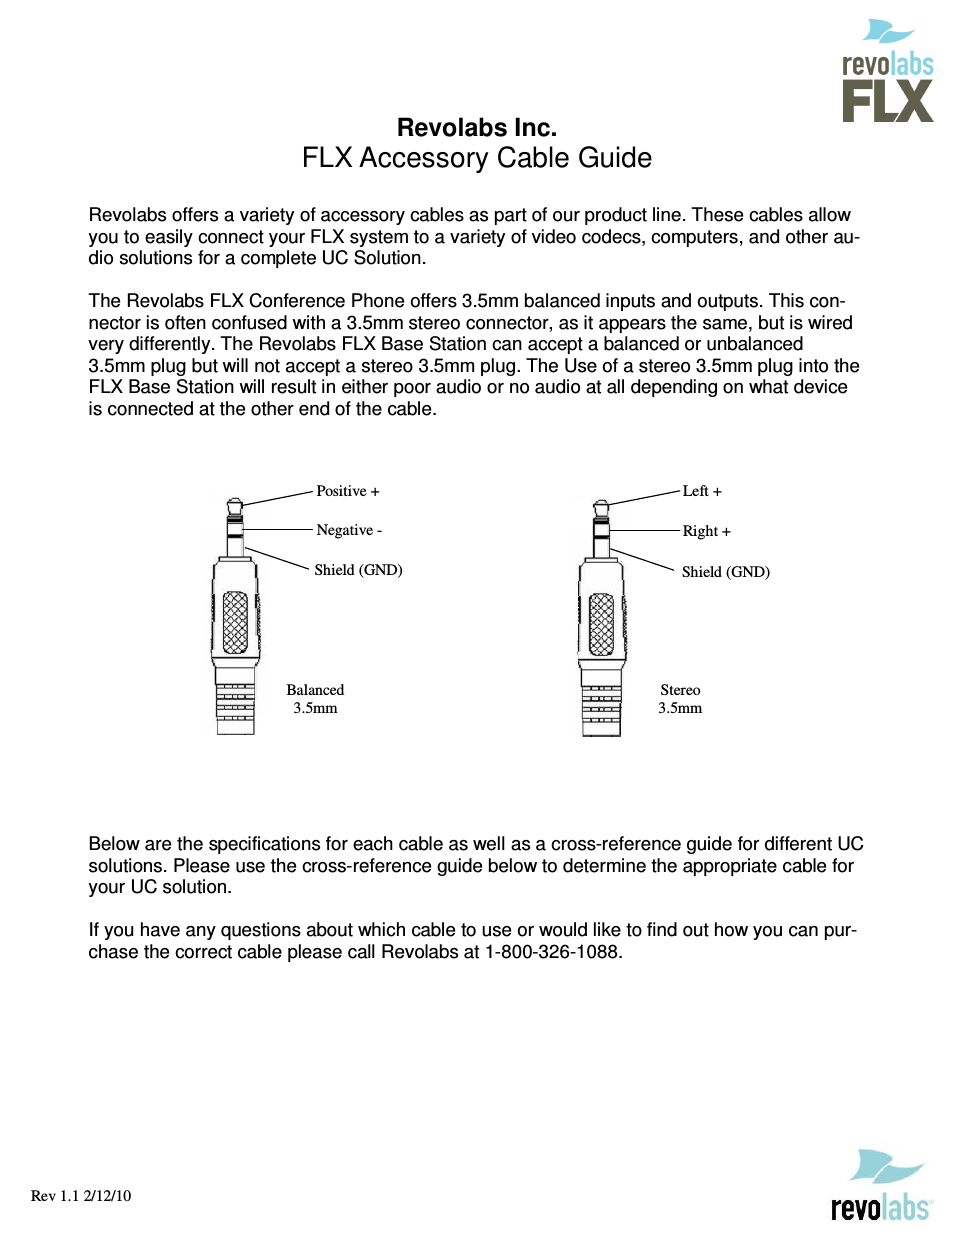 FLX Accessory Cable Guide